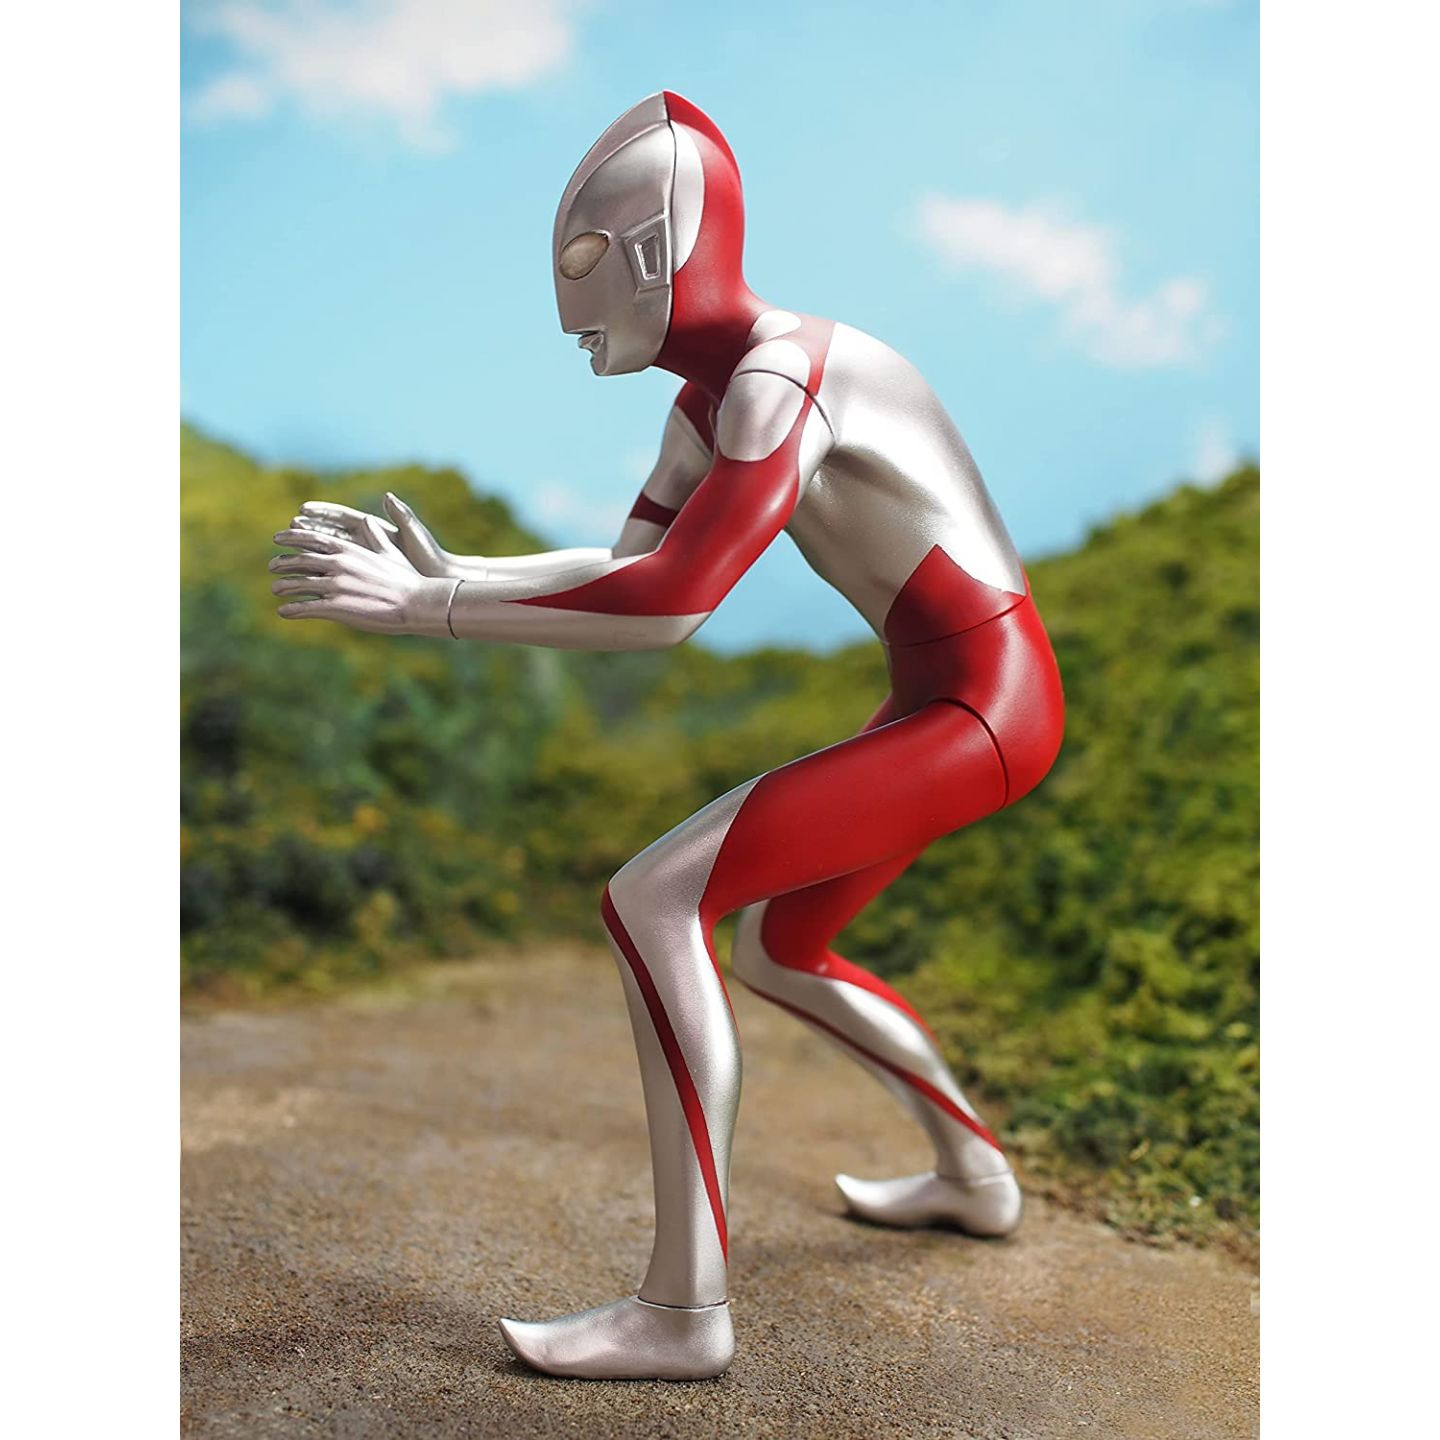 1/8 Collectable Series Ultraman (Shin Ultraman) Fighting Pose Ver. w/LED  Luminous Gimmick (Completed) Hi-Res image list